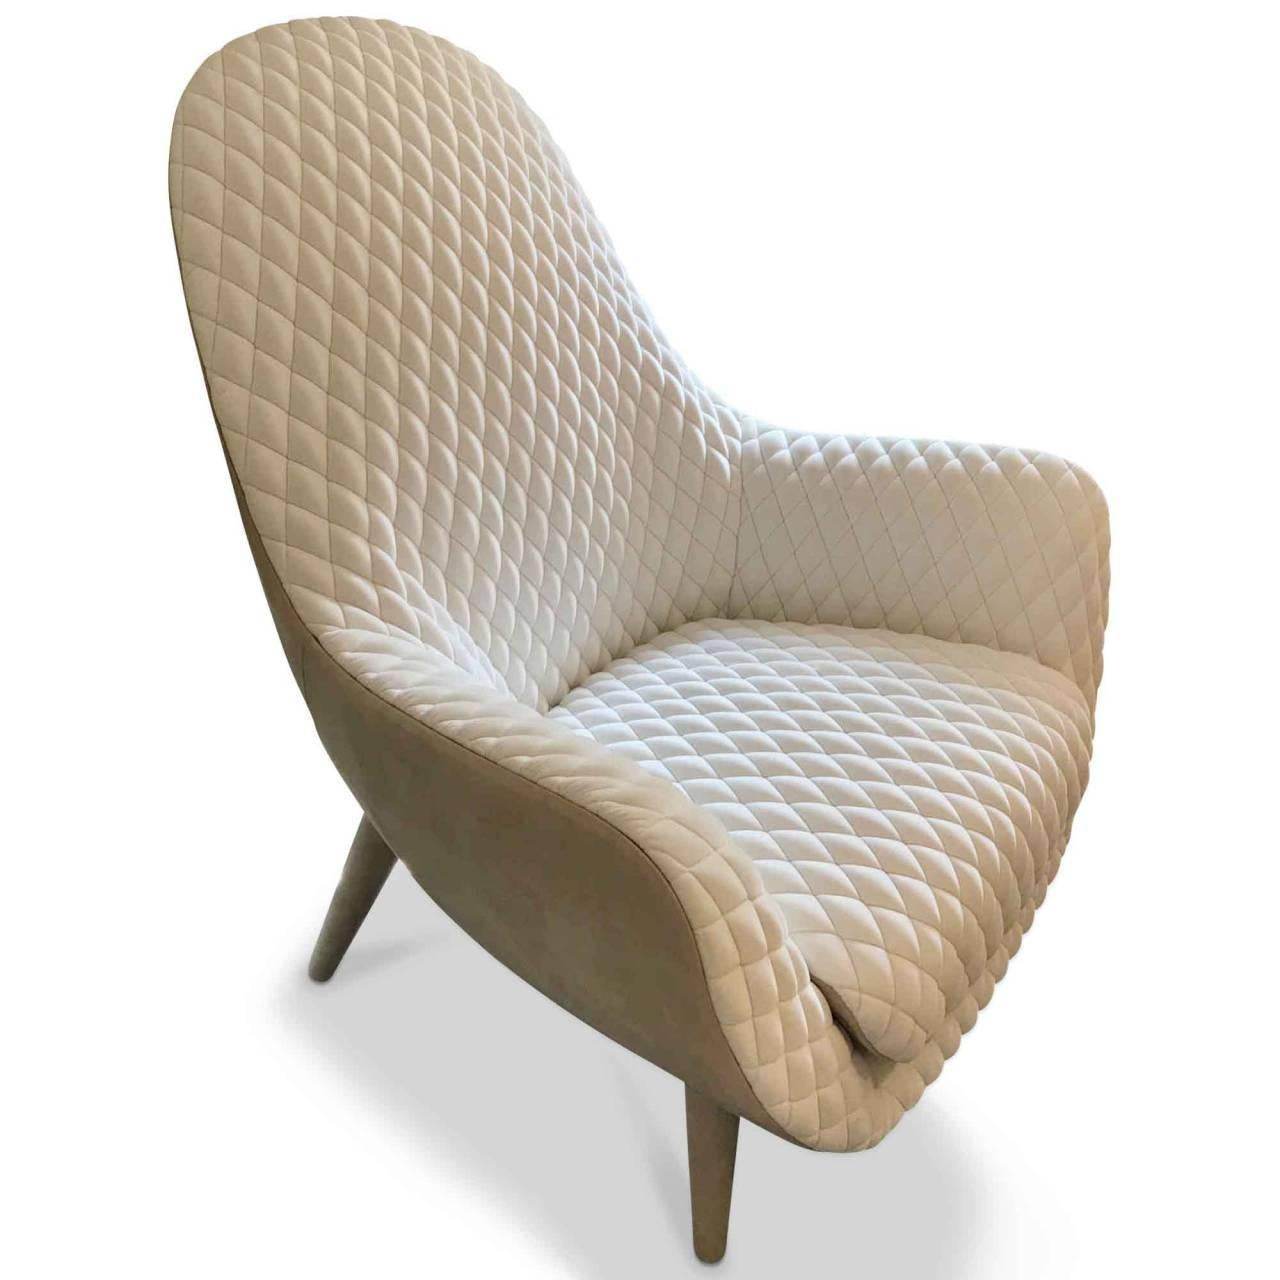 We are delighted to present to you the magnificent armchair 